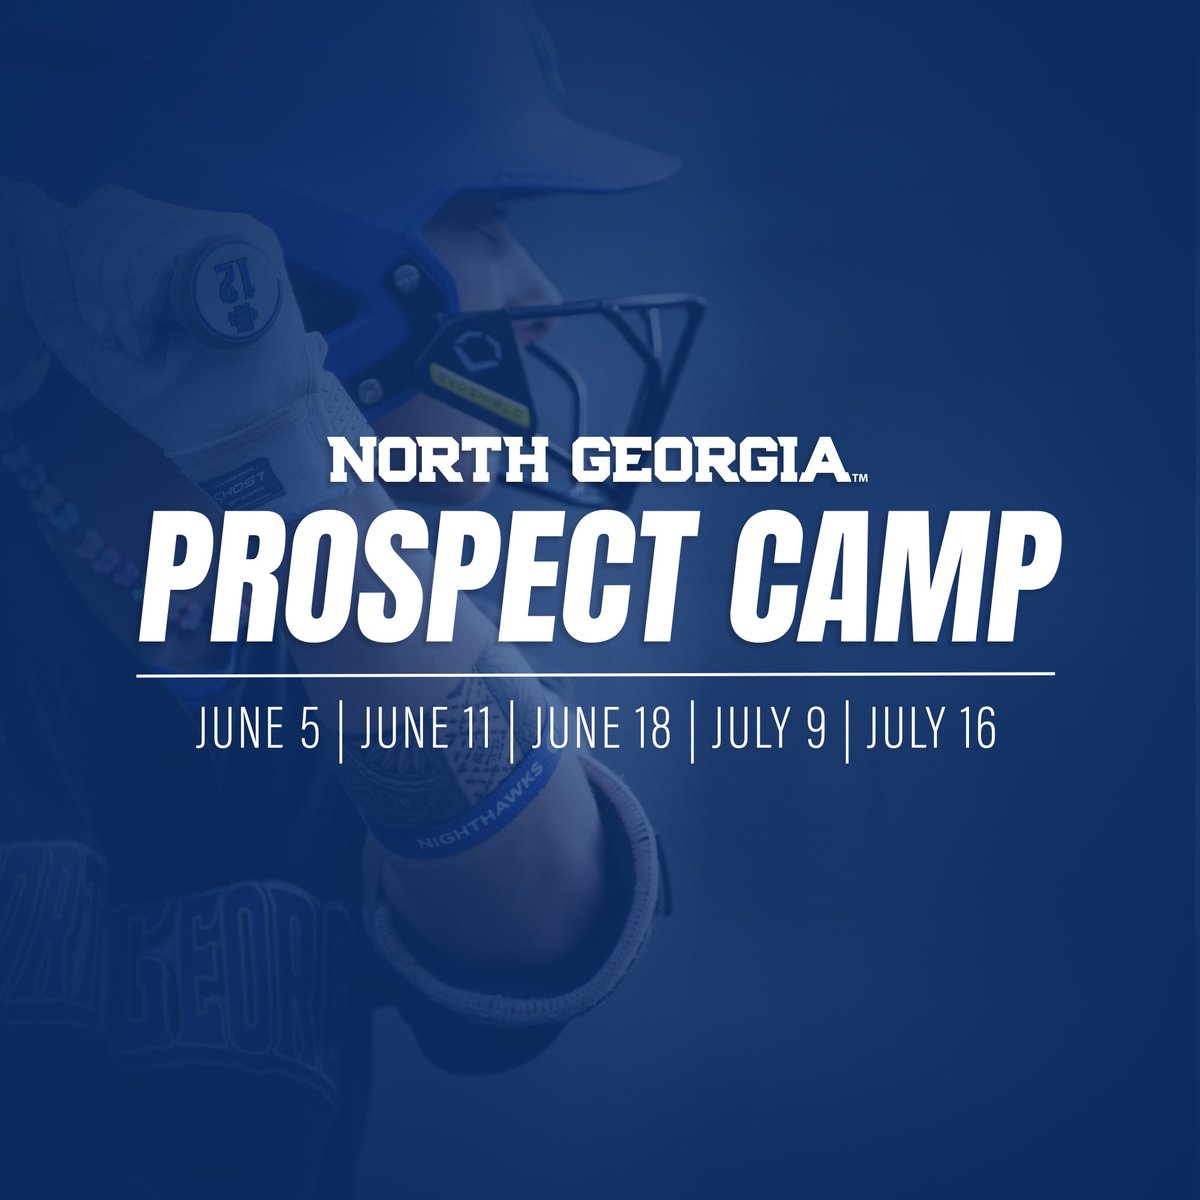 Future Nighthawks ~
…we will see you this Summer! ☀️ 

• PROSPECT CAMP •

5️⃣ Dates:
June 5 • June 11 • June 18
        July 9 • July 16

Register here: 💻
ungathletics.com/sports/2014/5/…